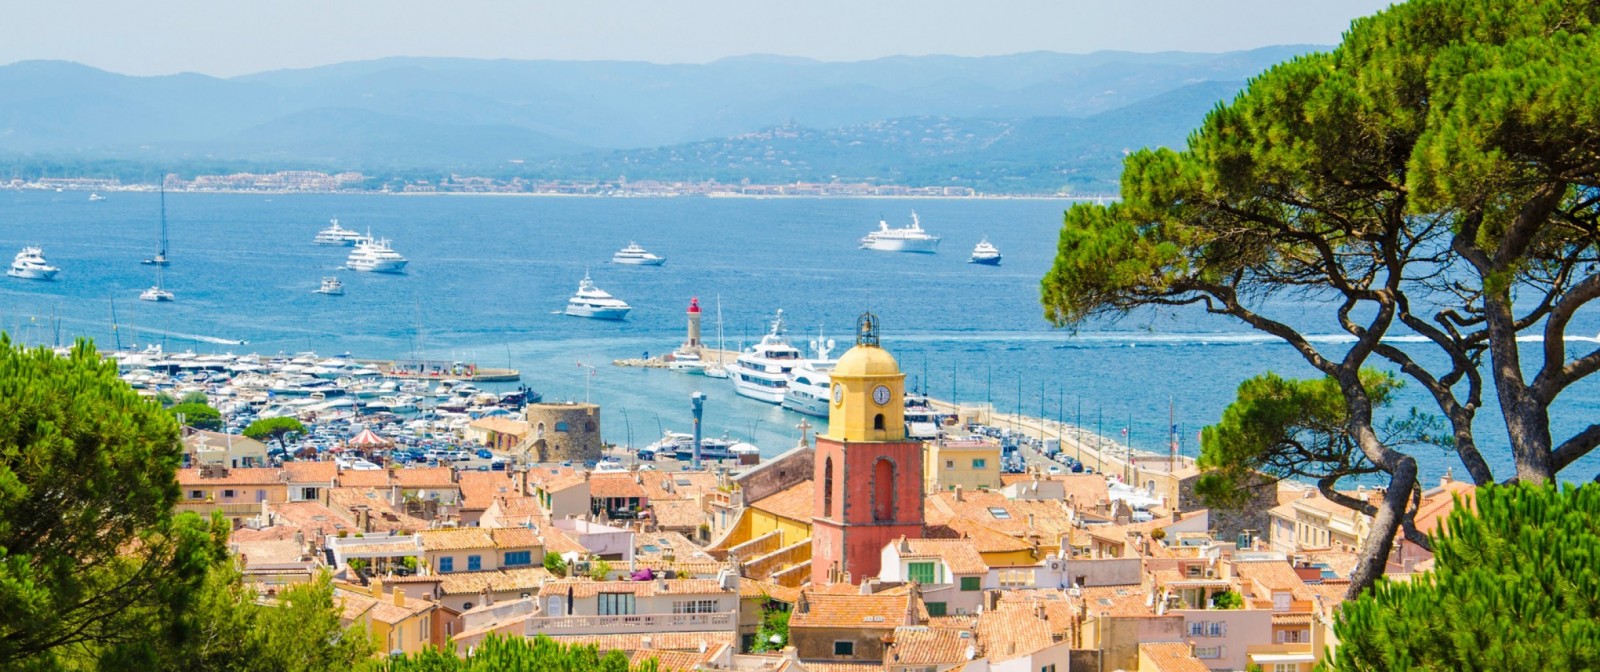 Private Chauffeur for Cannes Yachting Festival - Premium Vehicles & Services - Reactivity 24/7 - Ruby Services - Car Rental with Driver for Cannes Yachting Festival